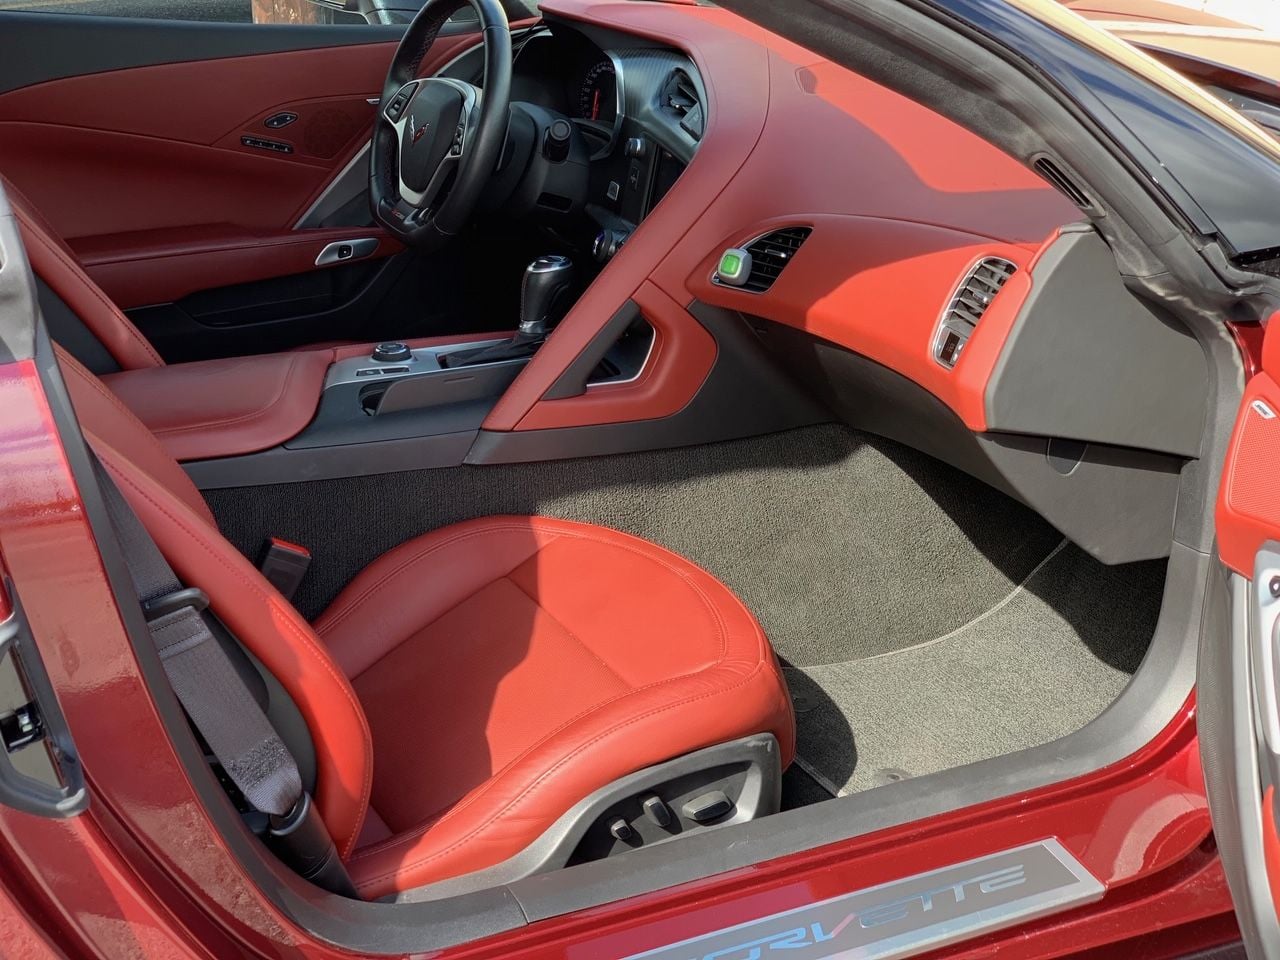 2016 Chevrolet Corvette - 2016 Z06 w/ Z07 pkg Long Beach Red A8 - Used - VIN 1G1YU2D64G5607204 - 3,276 Miles - 8 cyl - 2WD - Automatic - Coupe - Red - Weslaco, TX 78596, United States